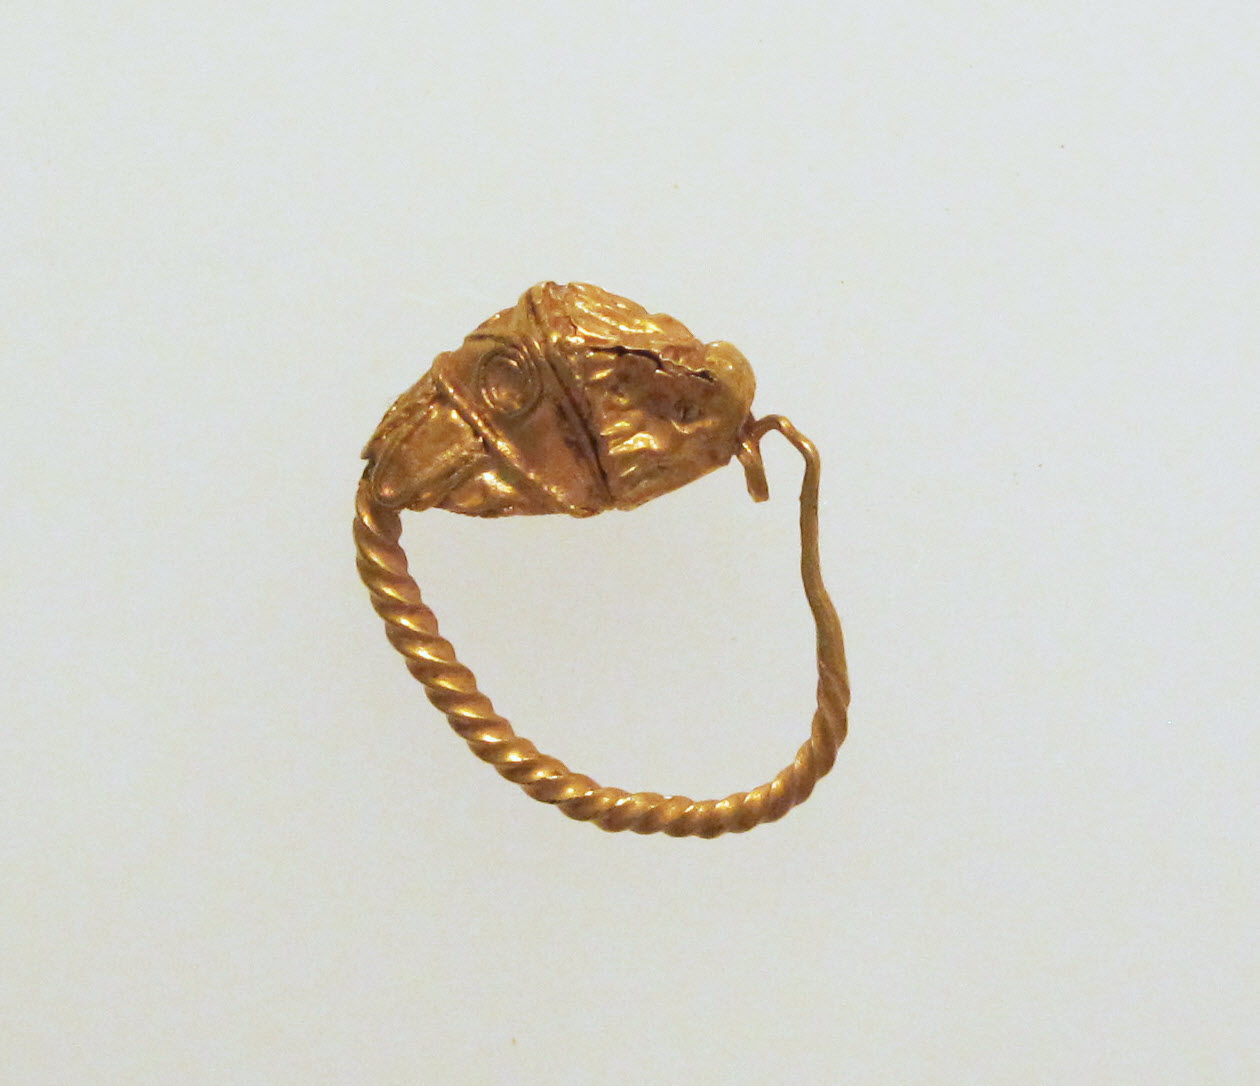 Gold earring with head of a lion | Greek | Classical or Hellenistic ...